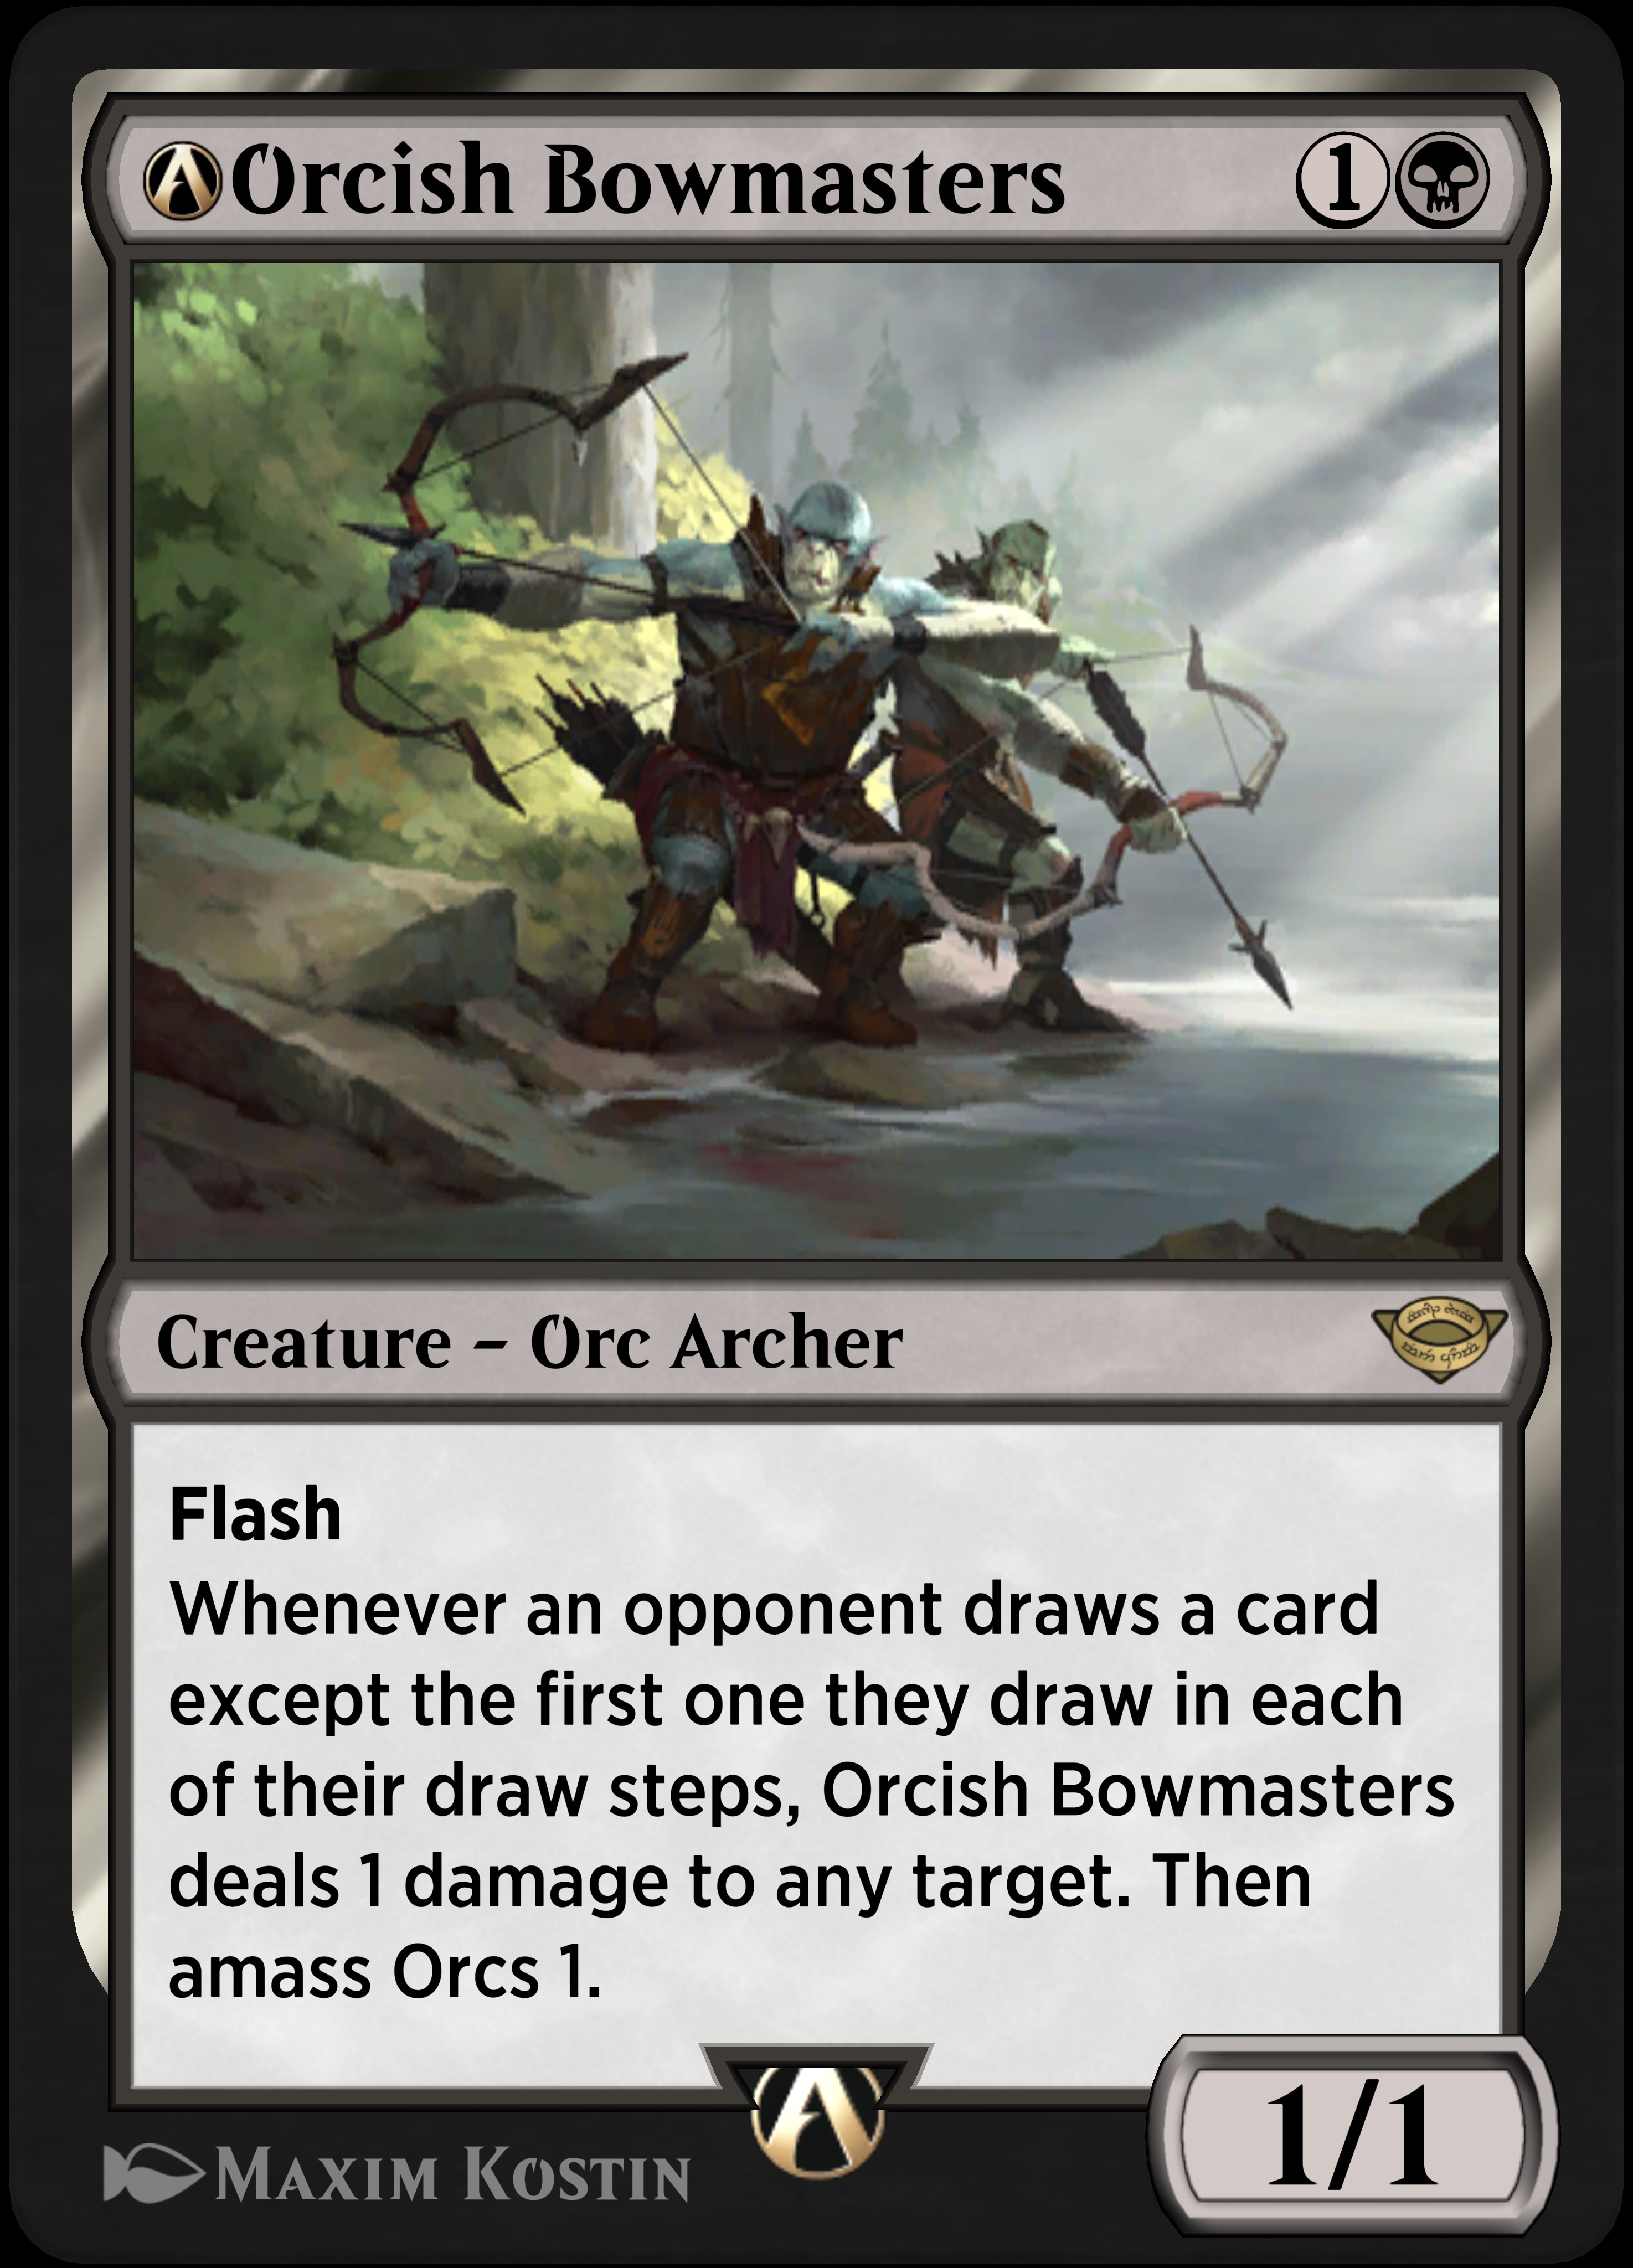 The new Orcish Bowmasters